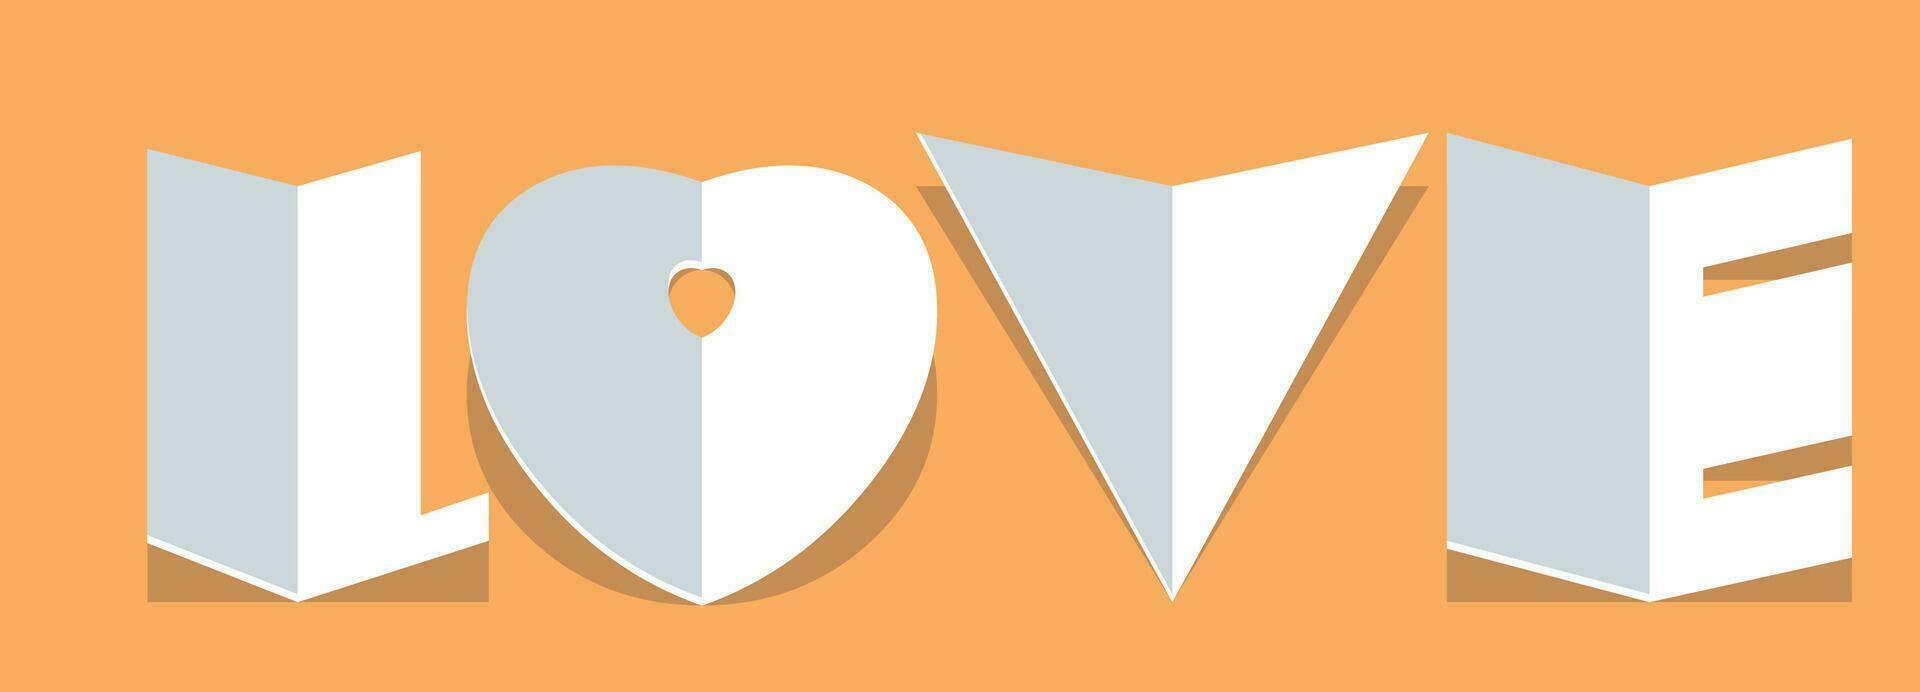 Illustration of creative paper text LOVE. vector